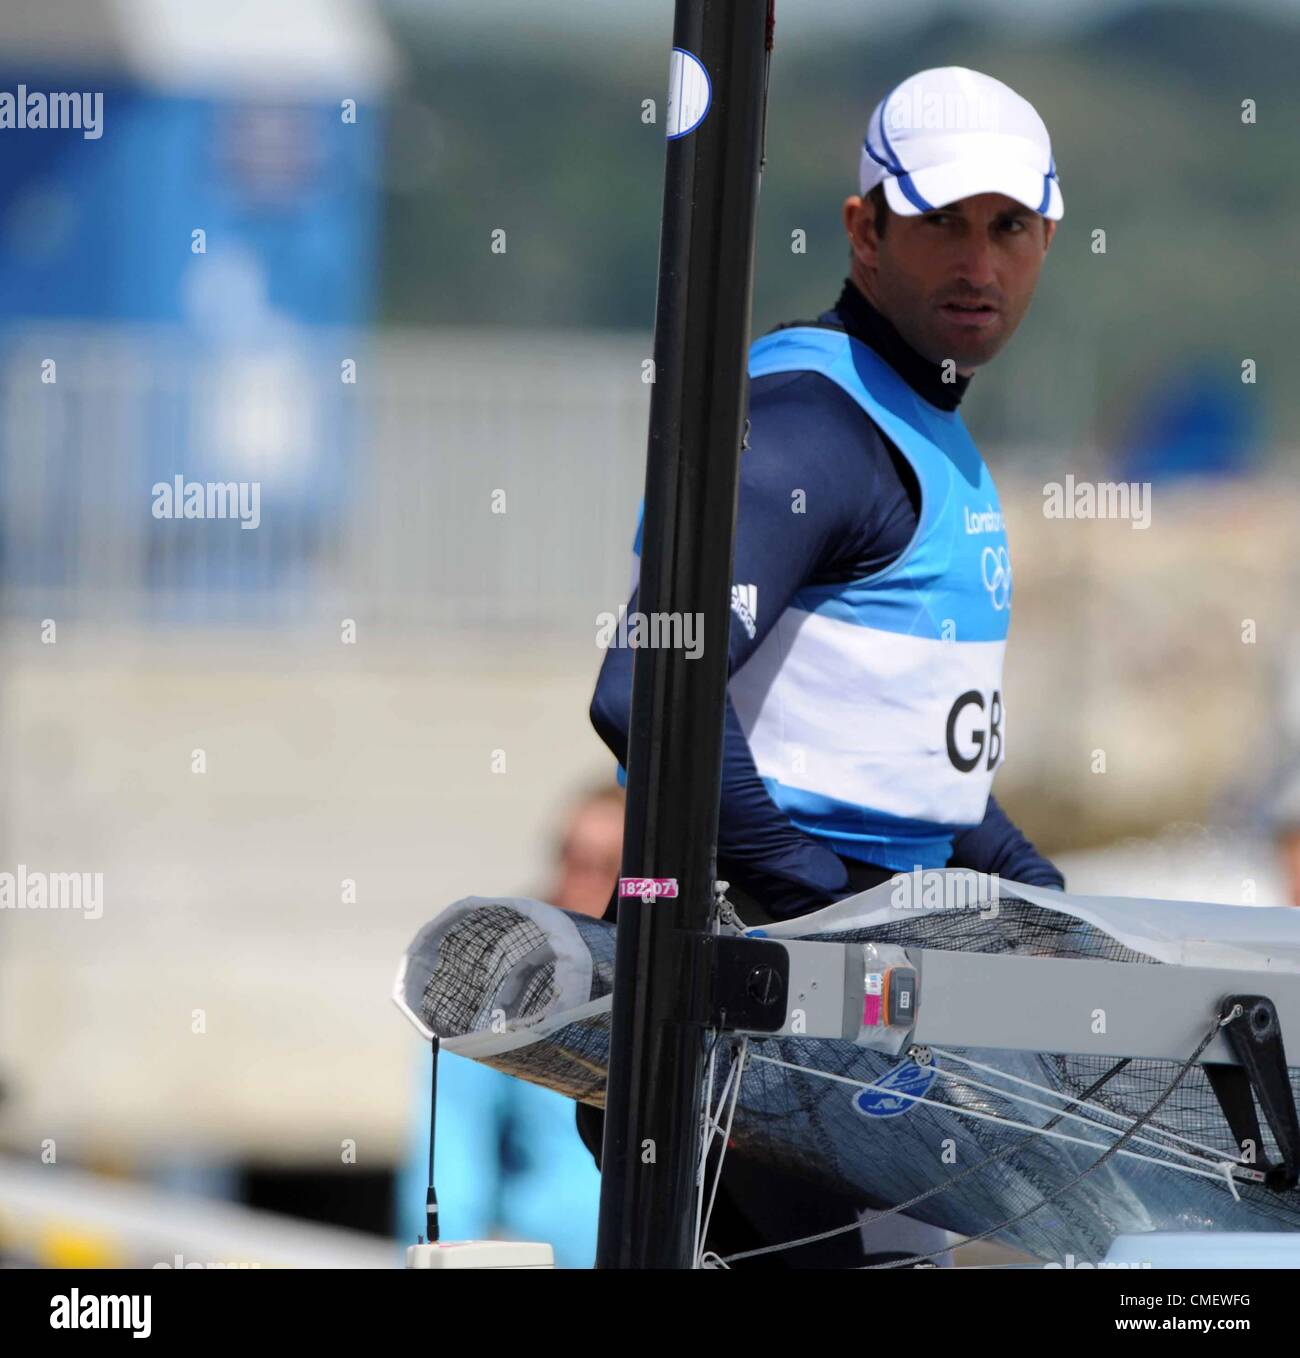 Ben Ainslie getting his boat prepared for the second day of Olympic Finn Class racing today (Mon) at Portland Dorset.  PICTURE BY: DORSET MEDIA SERVICE Stock Photo